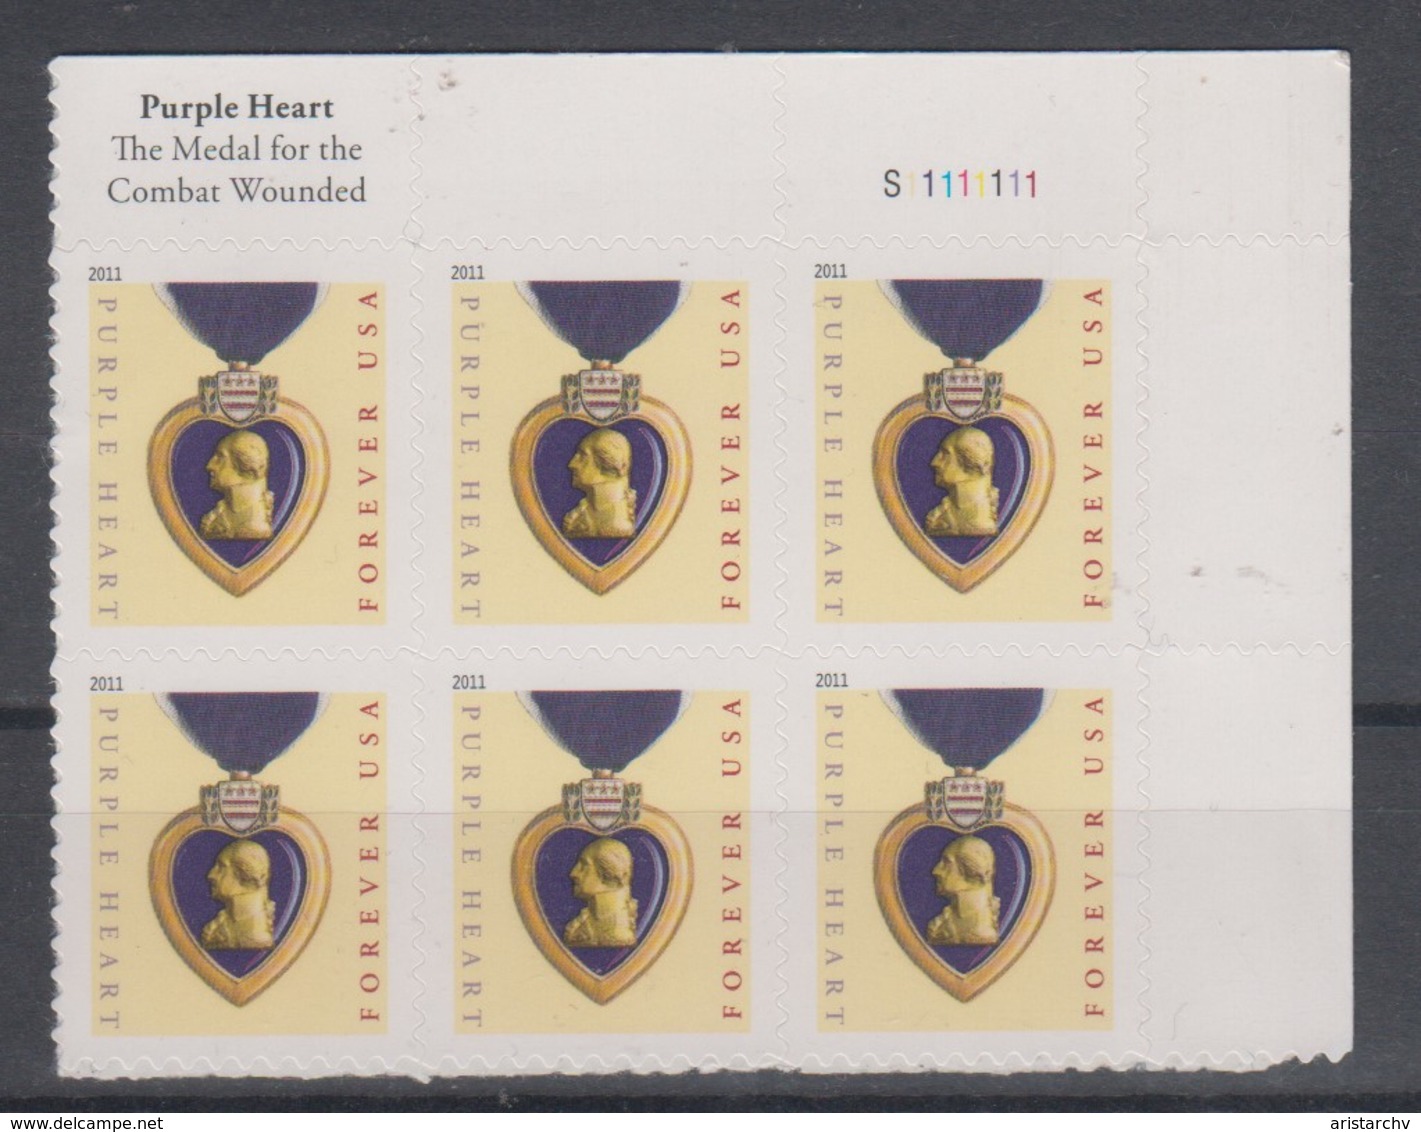 USA 2011 PLATE BLOCK OF 6 PURPLE HEART THE MEDAL FOR THE COMBAT WOUNDED - Números De Placas